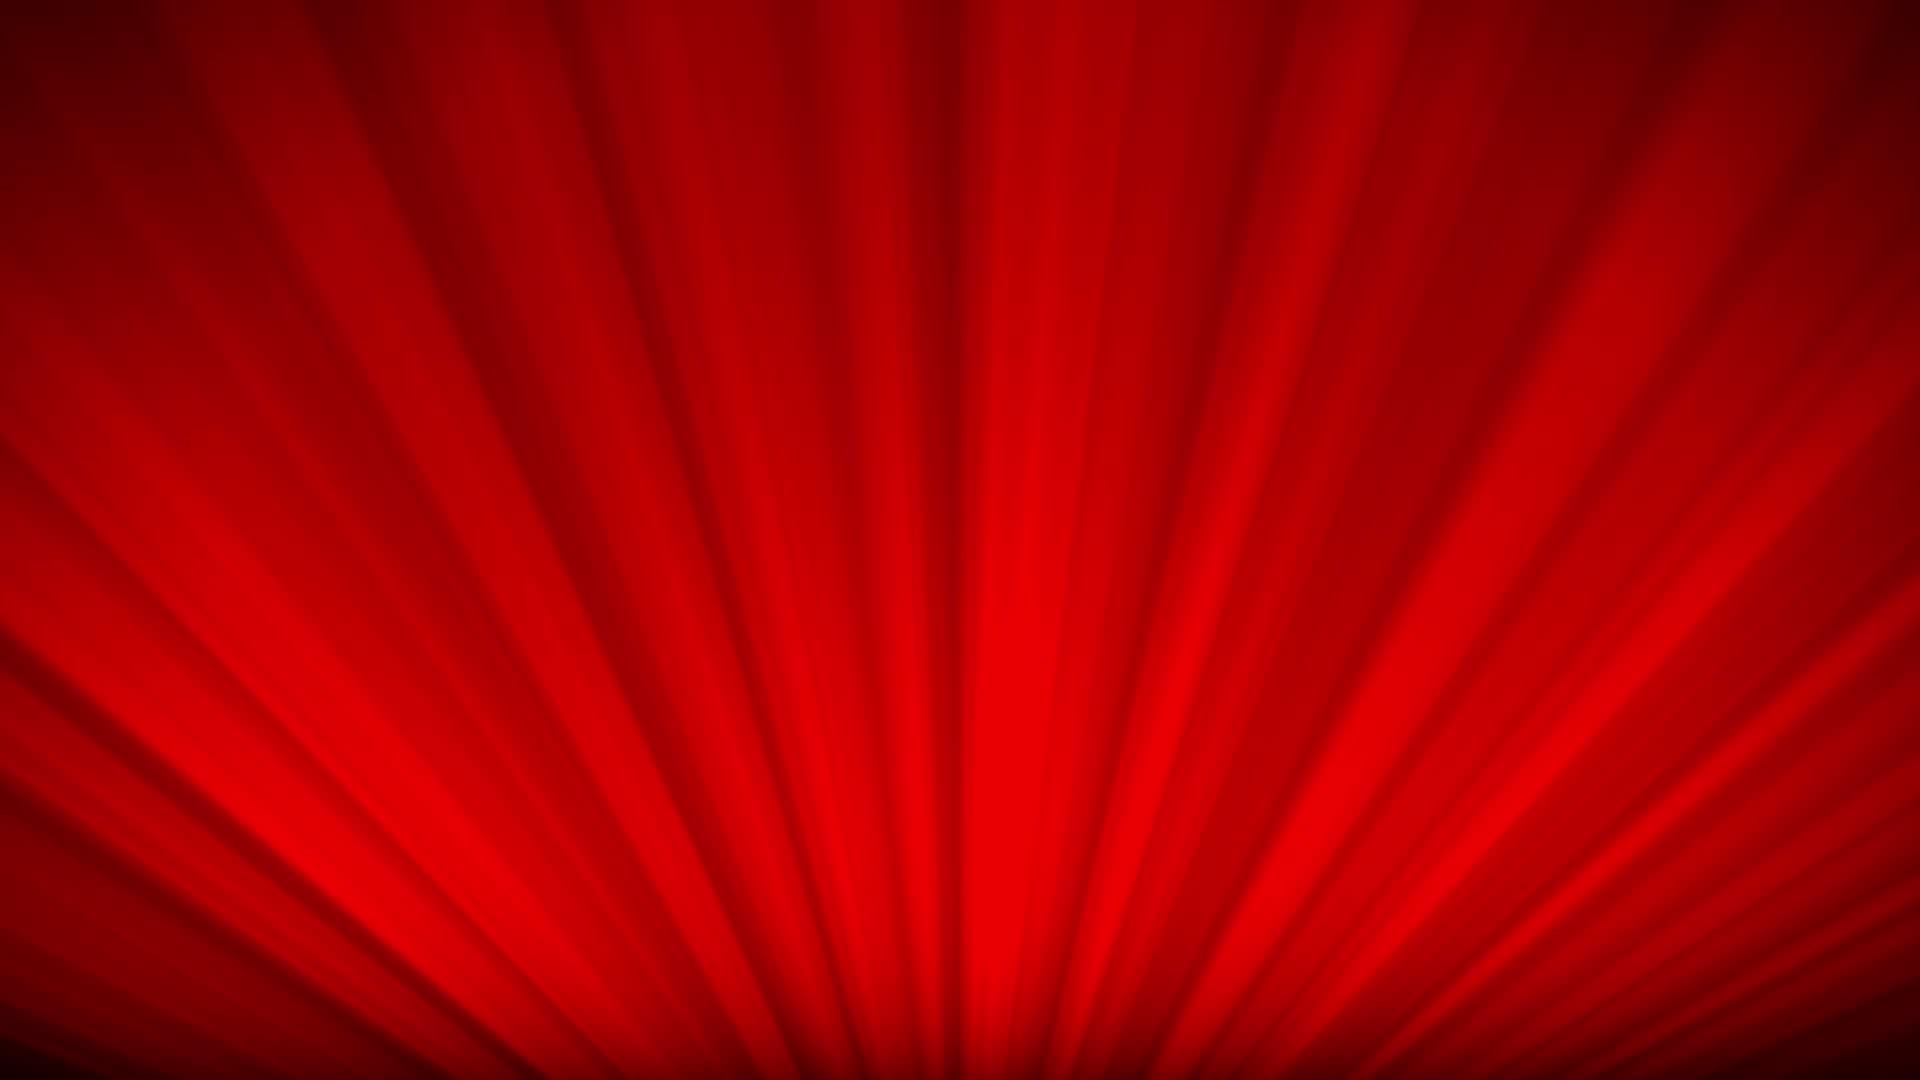 Red Abstract Background wallpaper | 1920x1080 | #10915